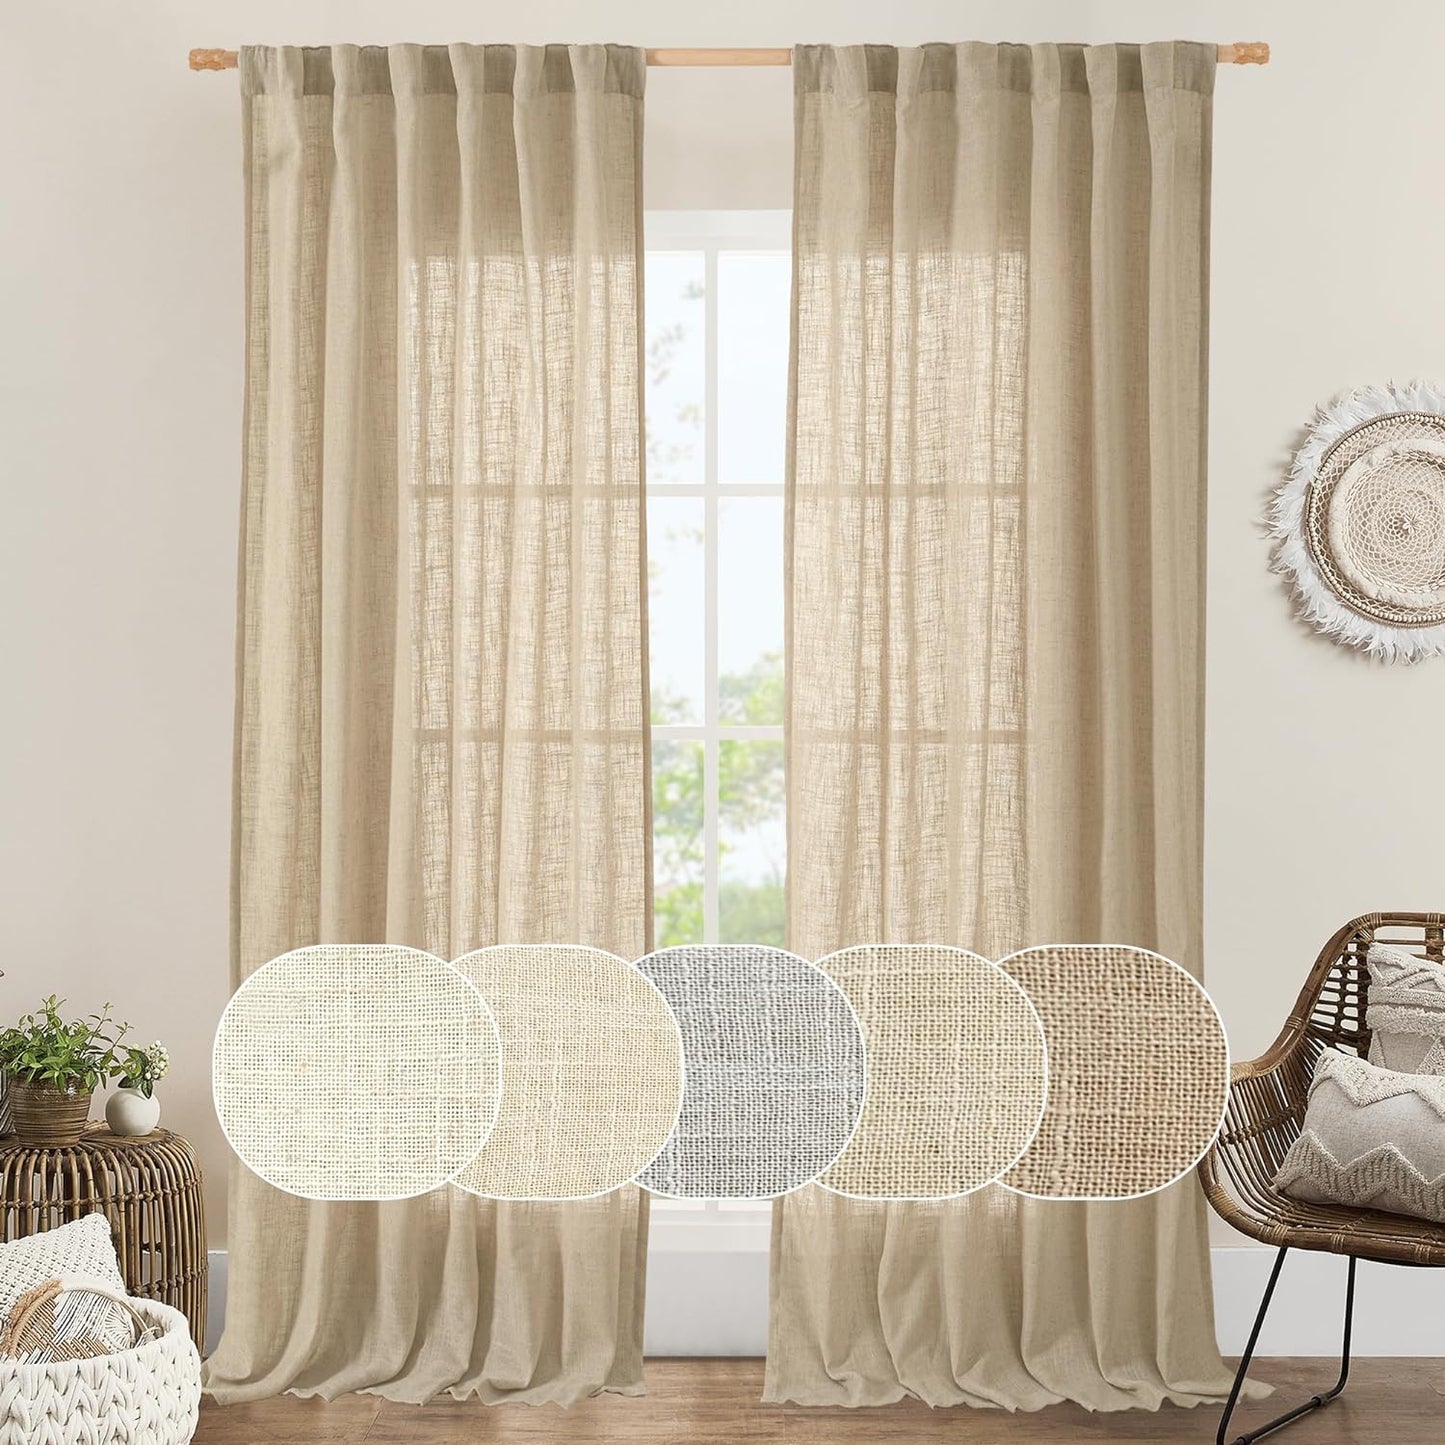 LAMIT Natural Linen Blended Curtains for Living Room, Back Tab and Rod Pocket Semi Sheer Curtains Light Filtering Country Rustic Drapes for Bedroom/Farmhouse, 2 Panels,52 X 108 Inch, Linen  LAMIT Brown 52W X 95L 